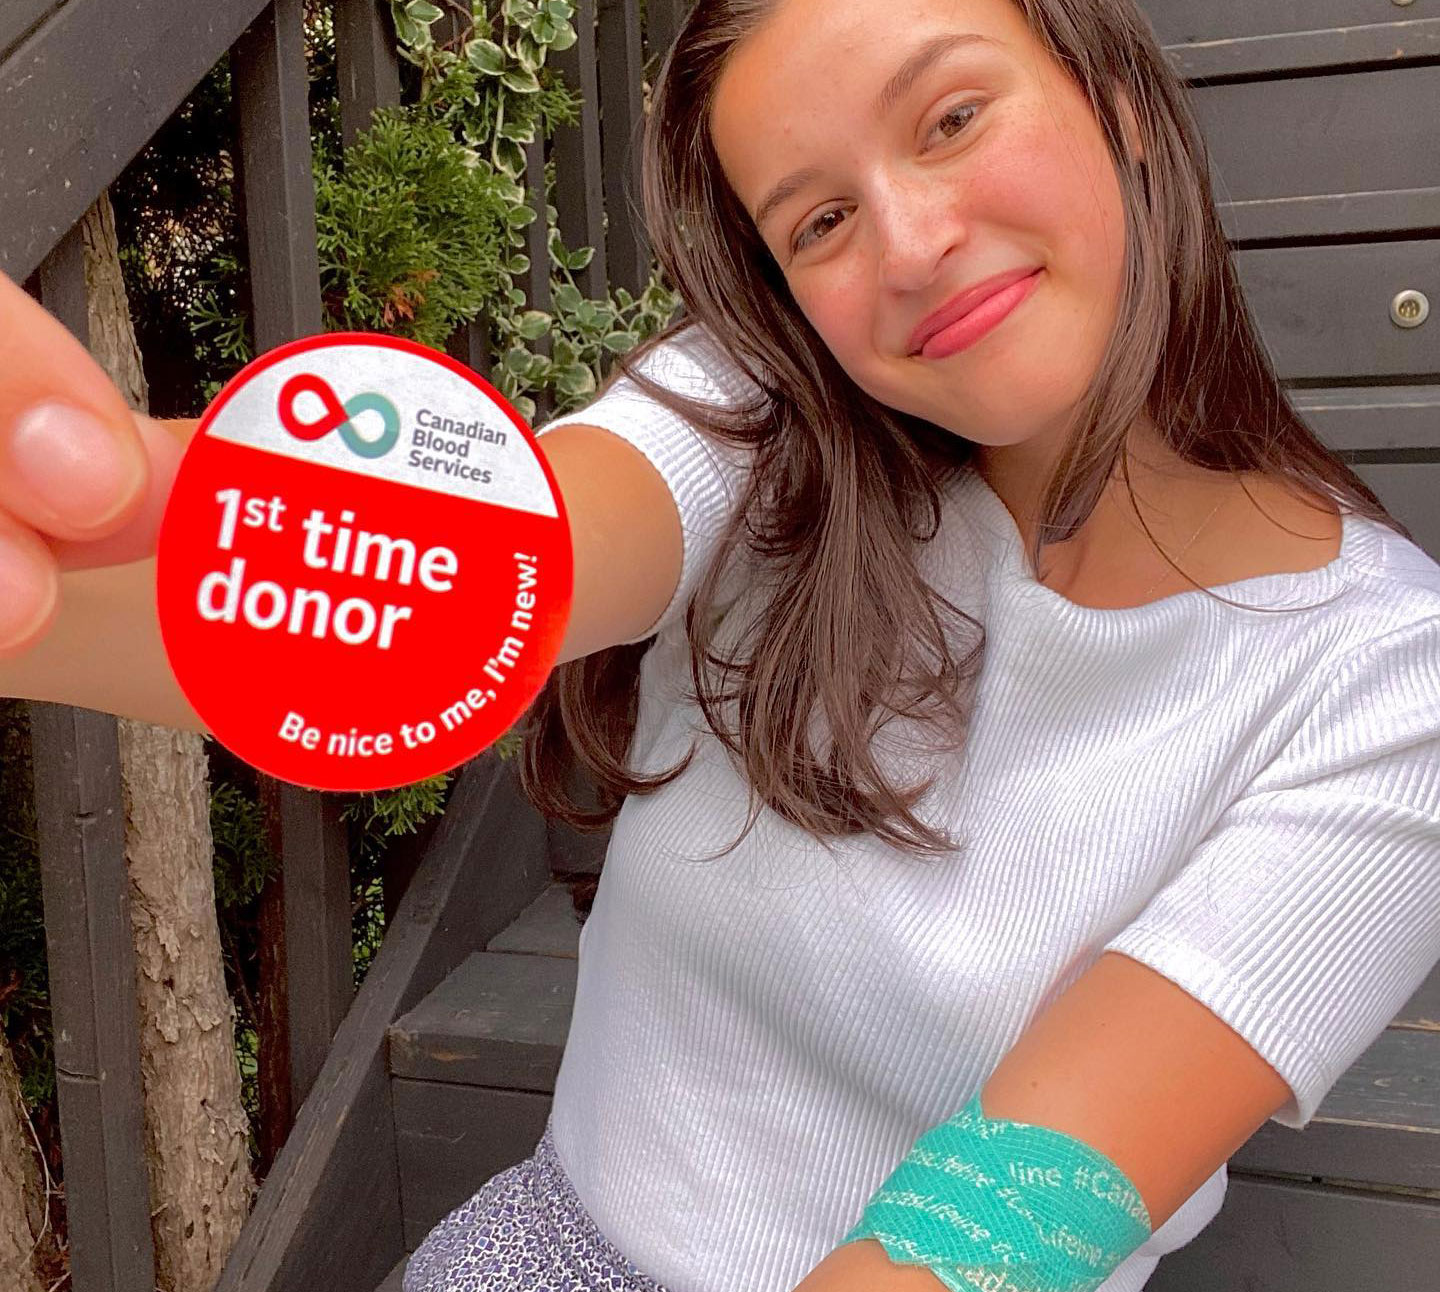 Young woman holding a 1st time donor sticker